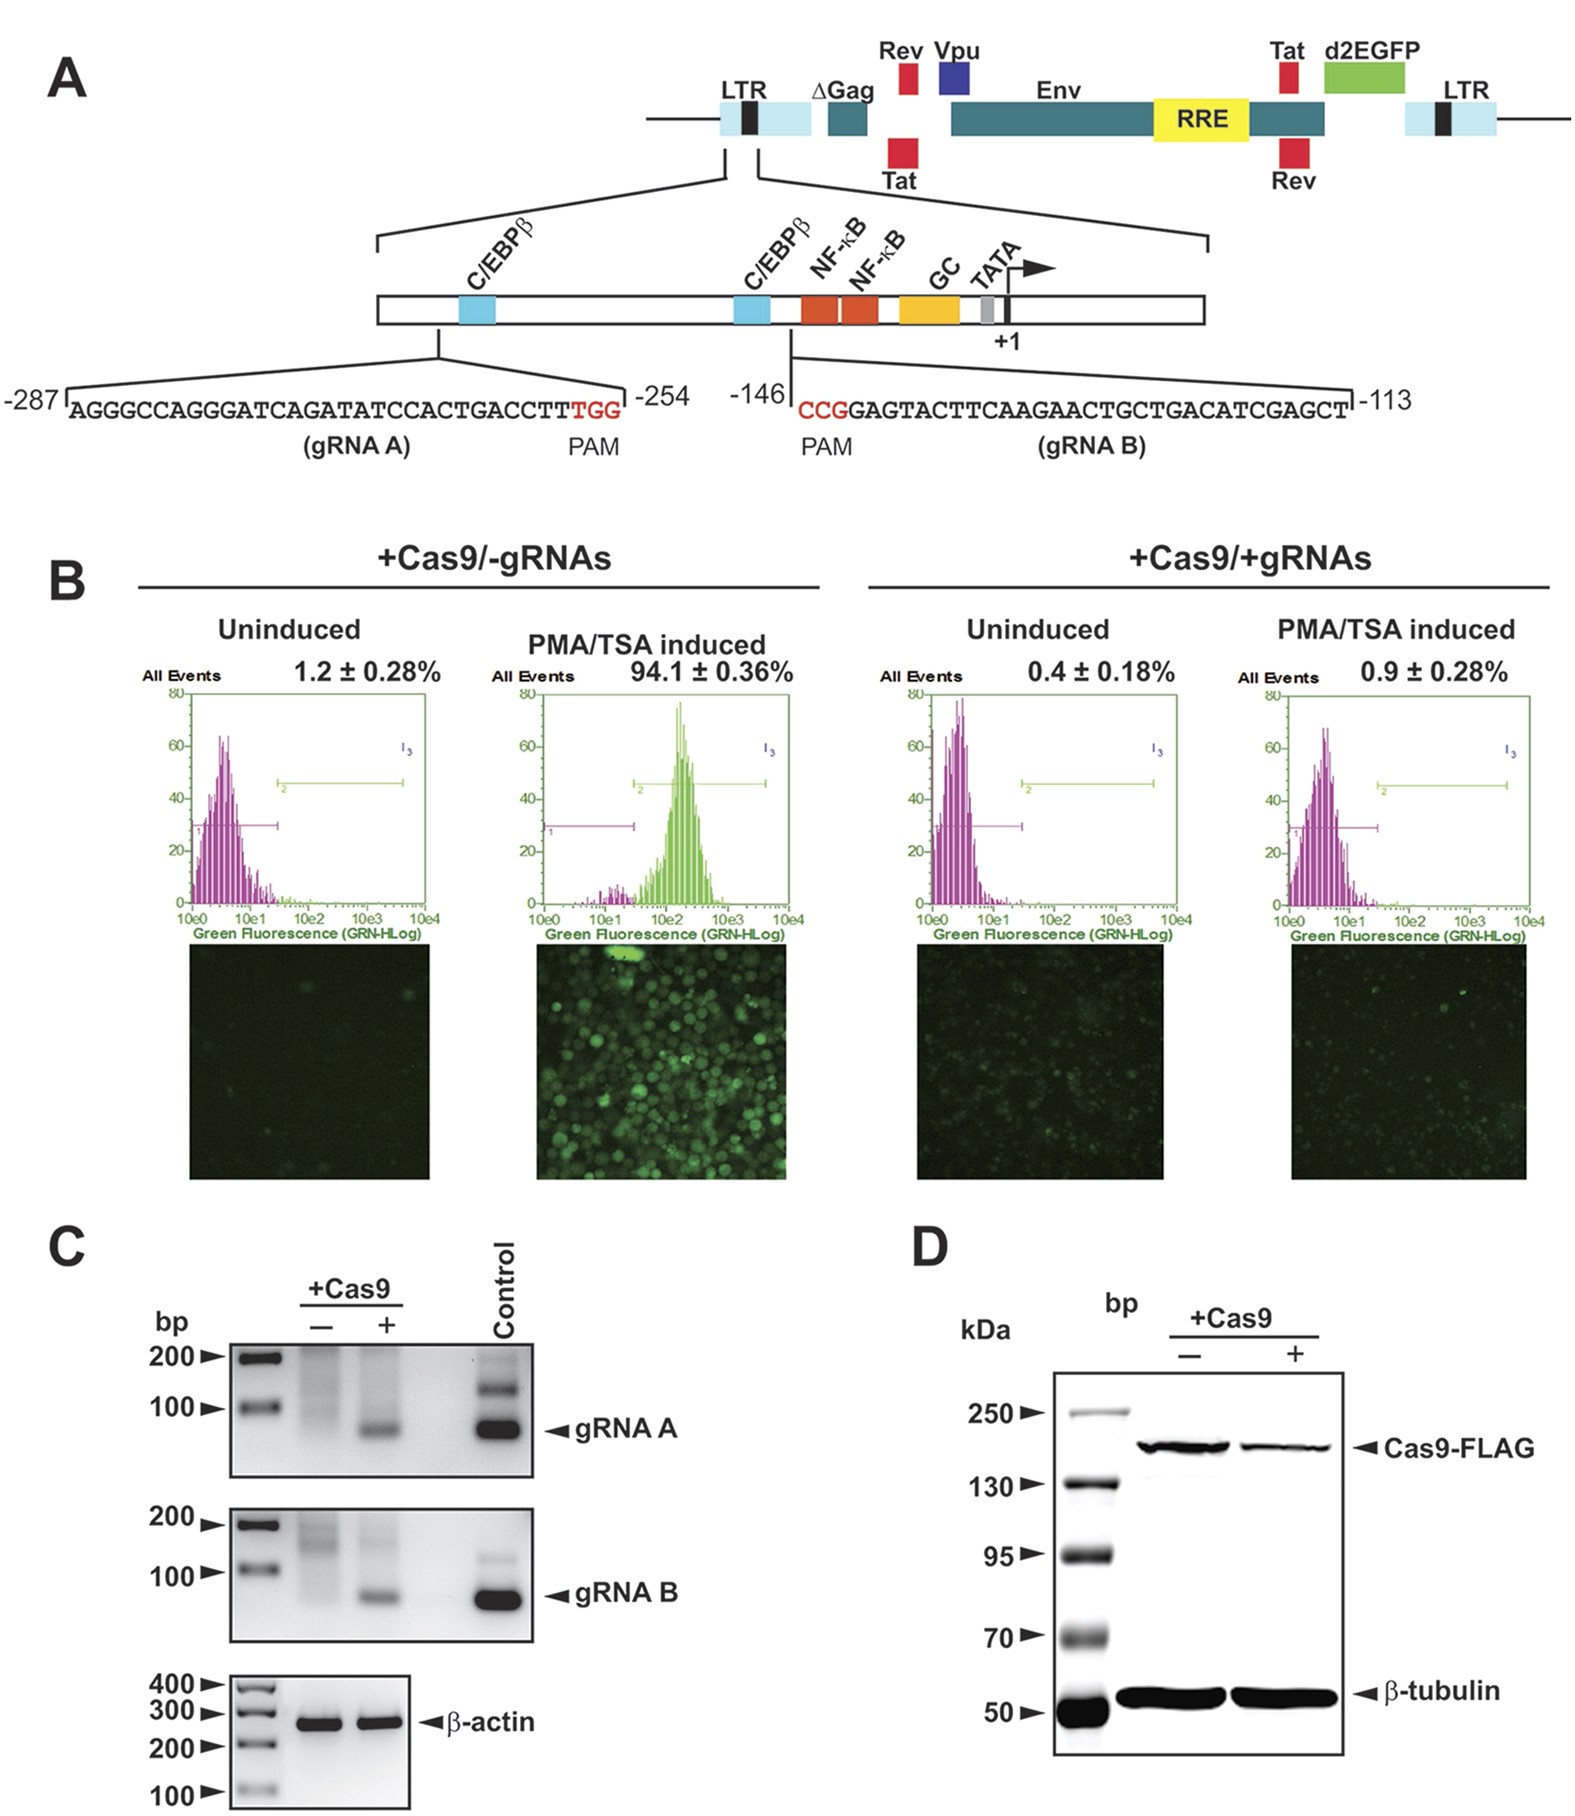 Elimination of HIV-1 Genomes from Human T-lymphoid Cells by CRISPR/Cas9 Gene Editing